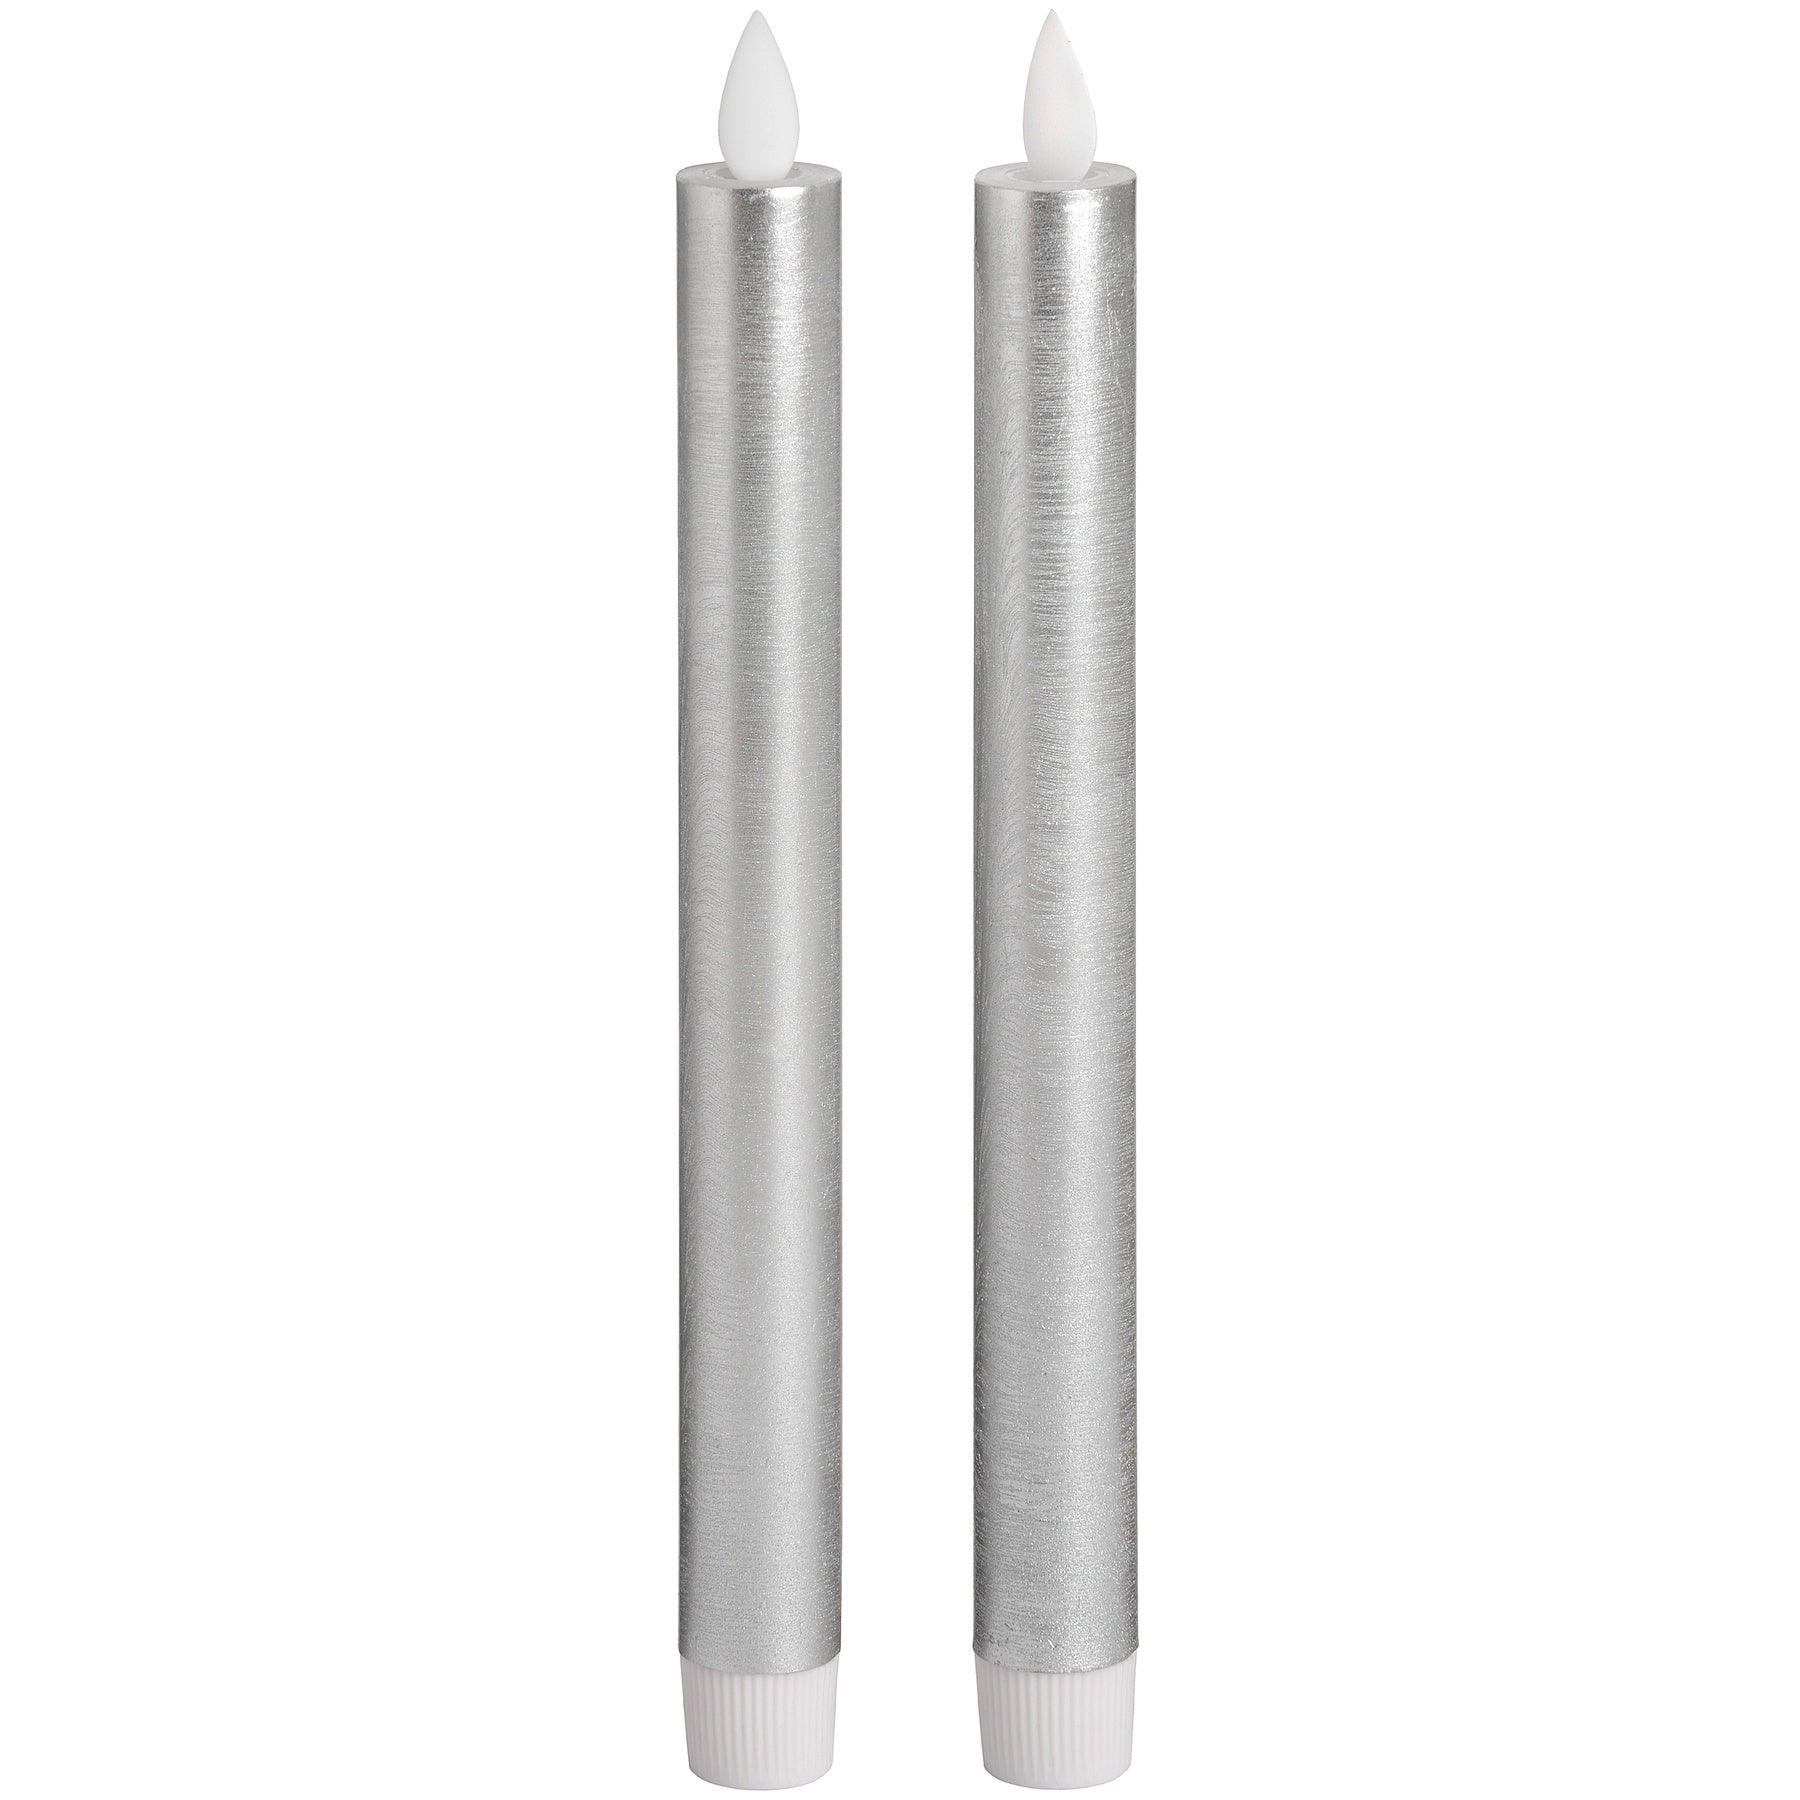 View Pair Of Silver Luxe Flickering Flame LED Wax Dinner Candles information